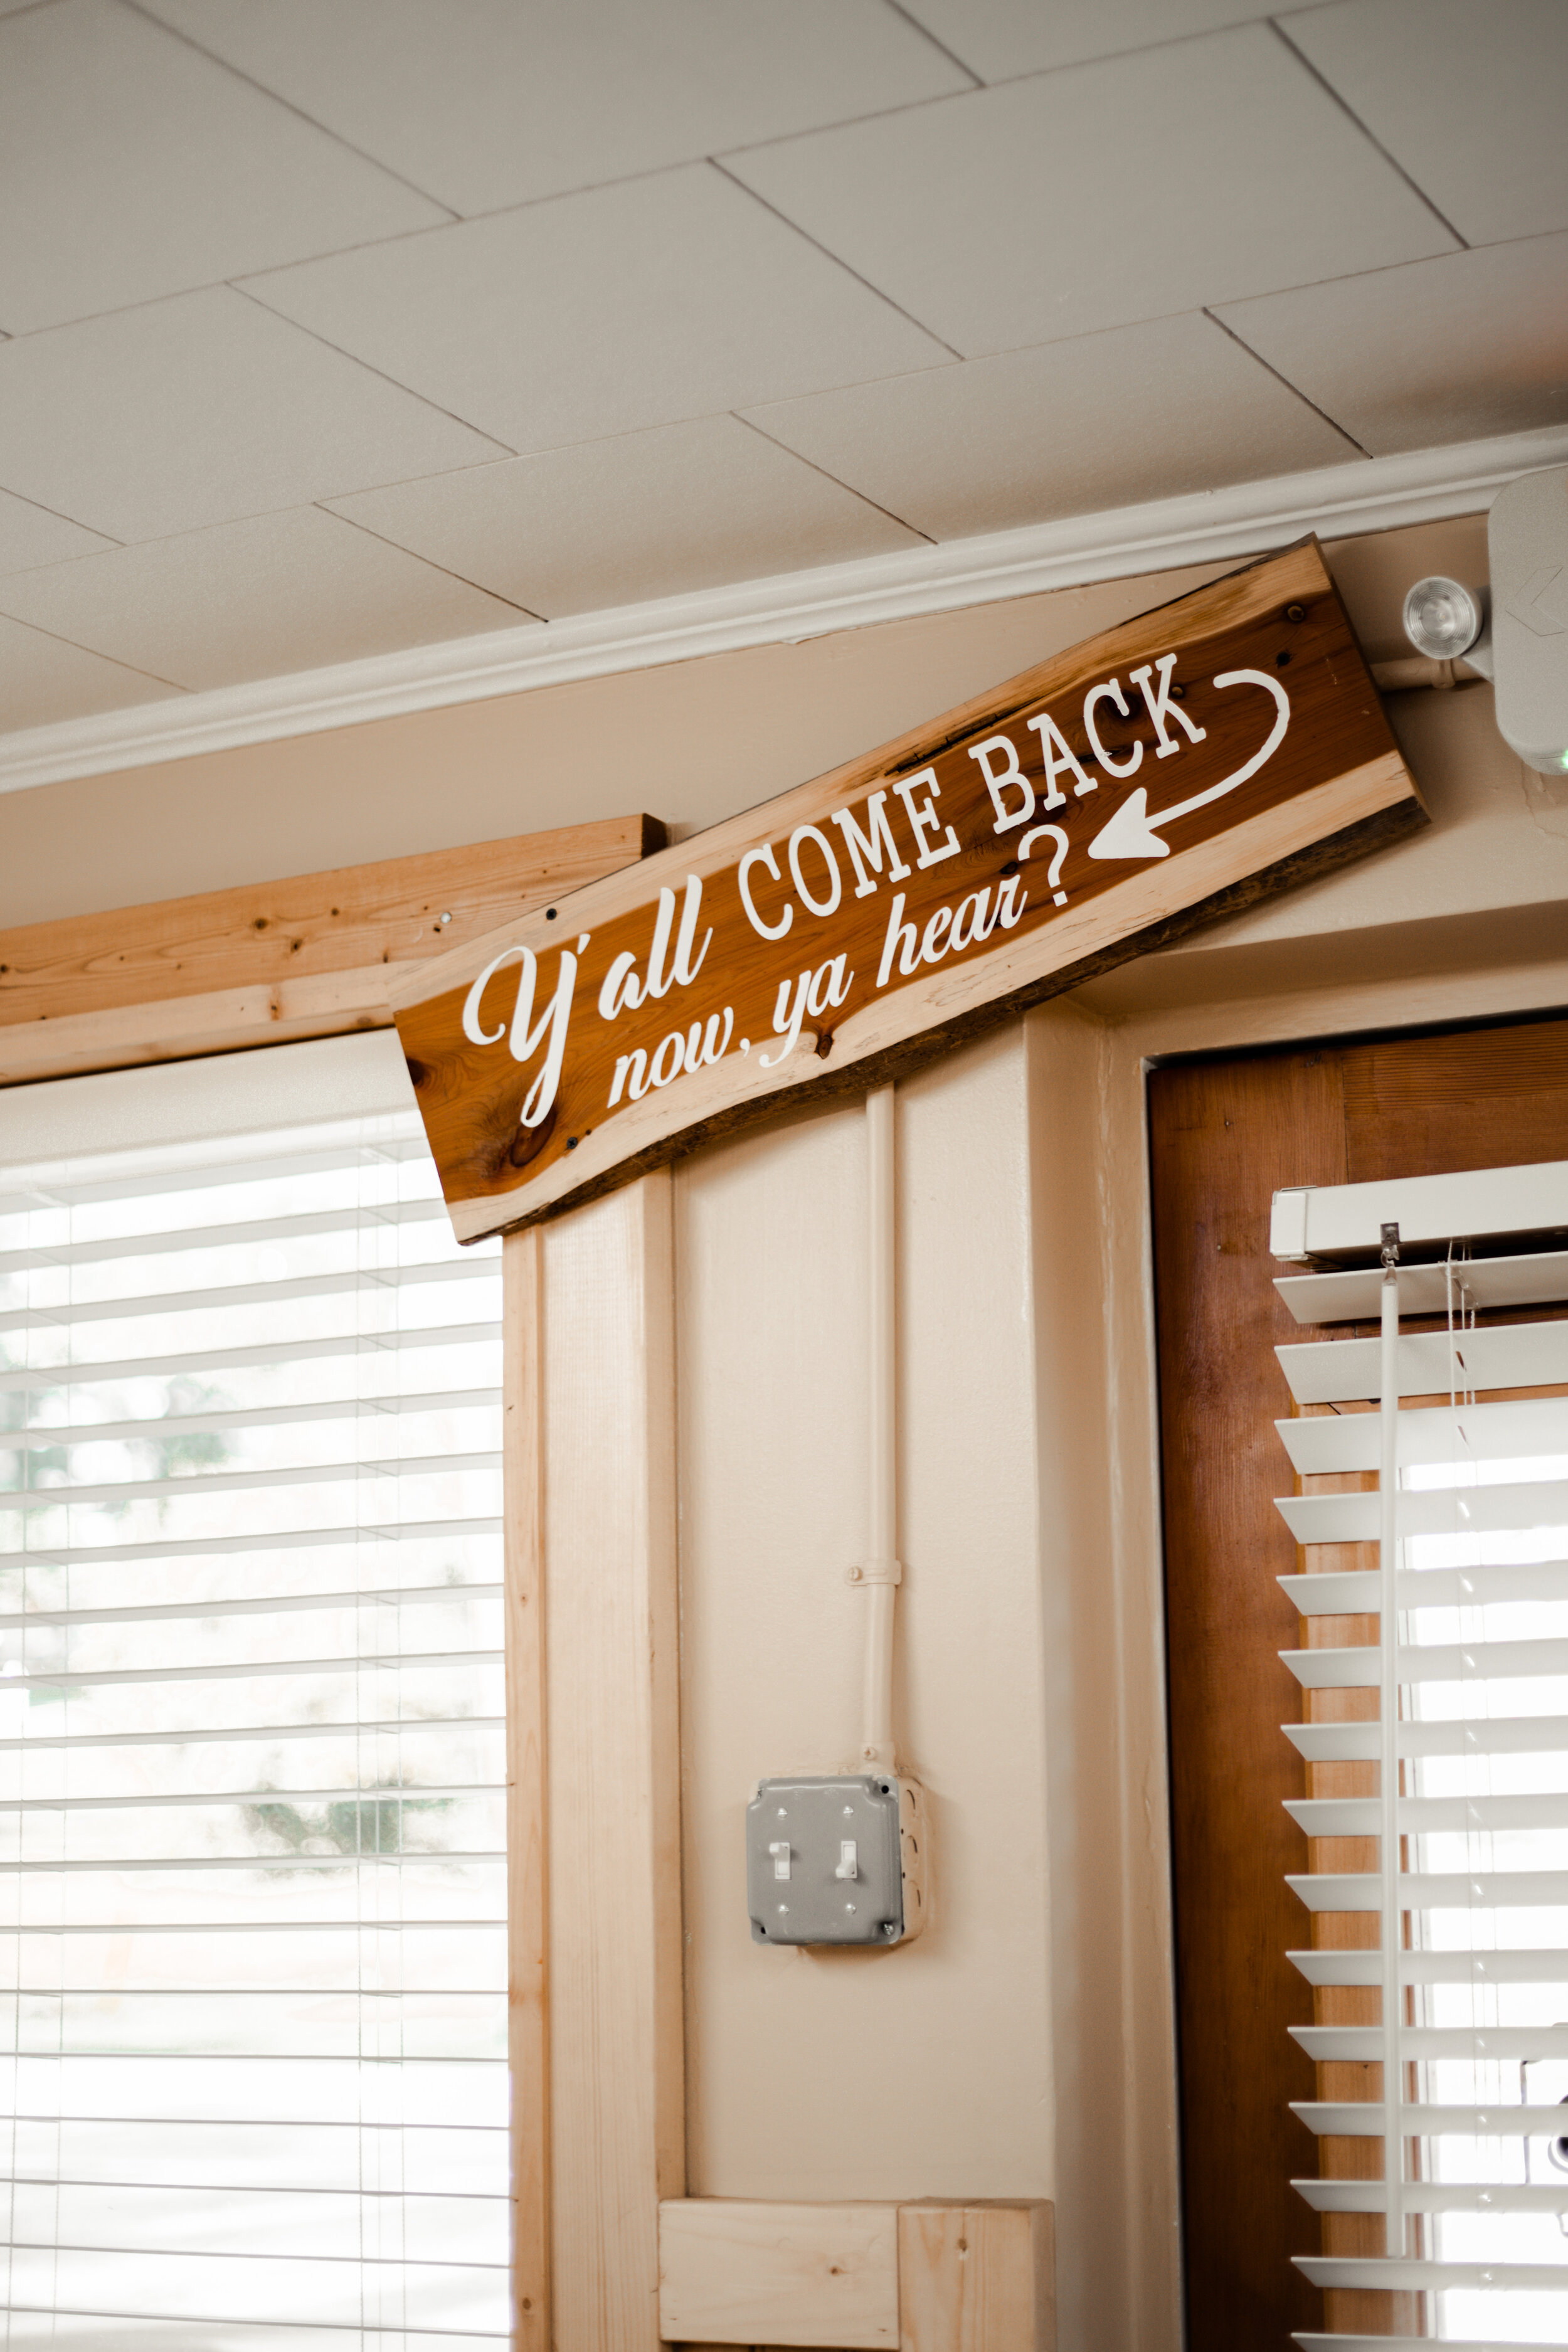 No small-town cafe is truly complete without this southern saying on the wall.